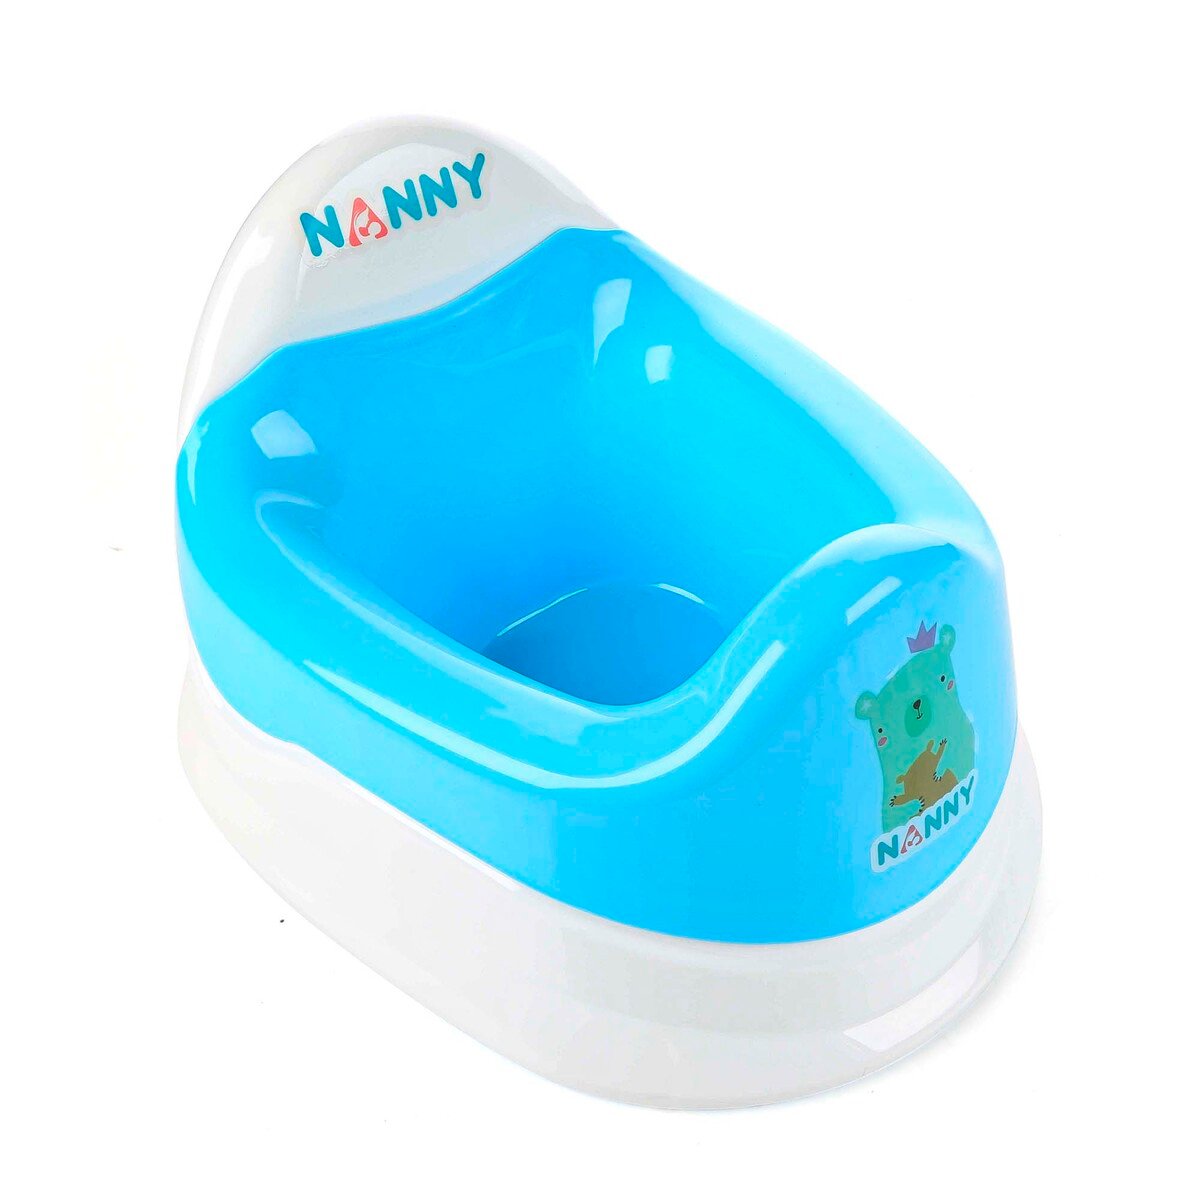 Picnic Baby Potty N472D6/PK Assorted